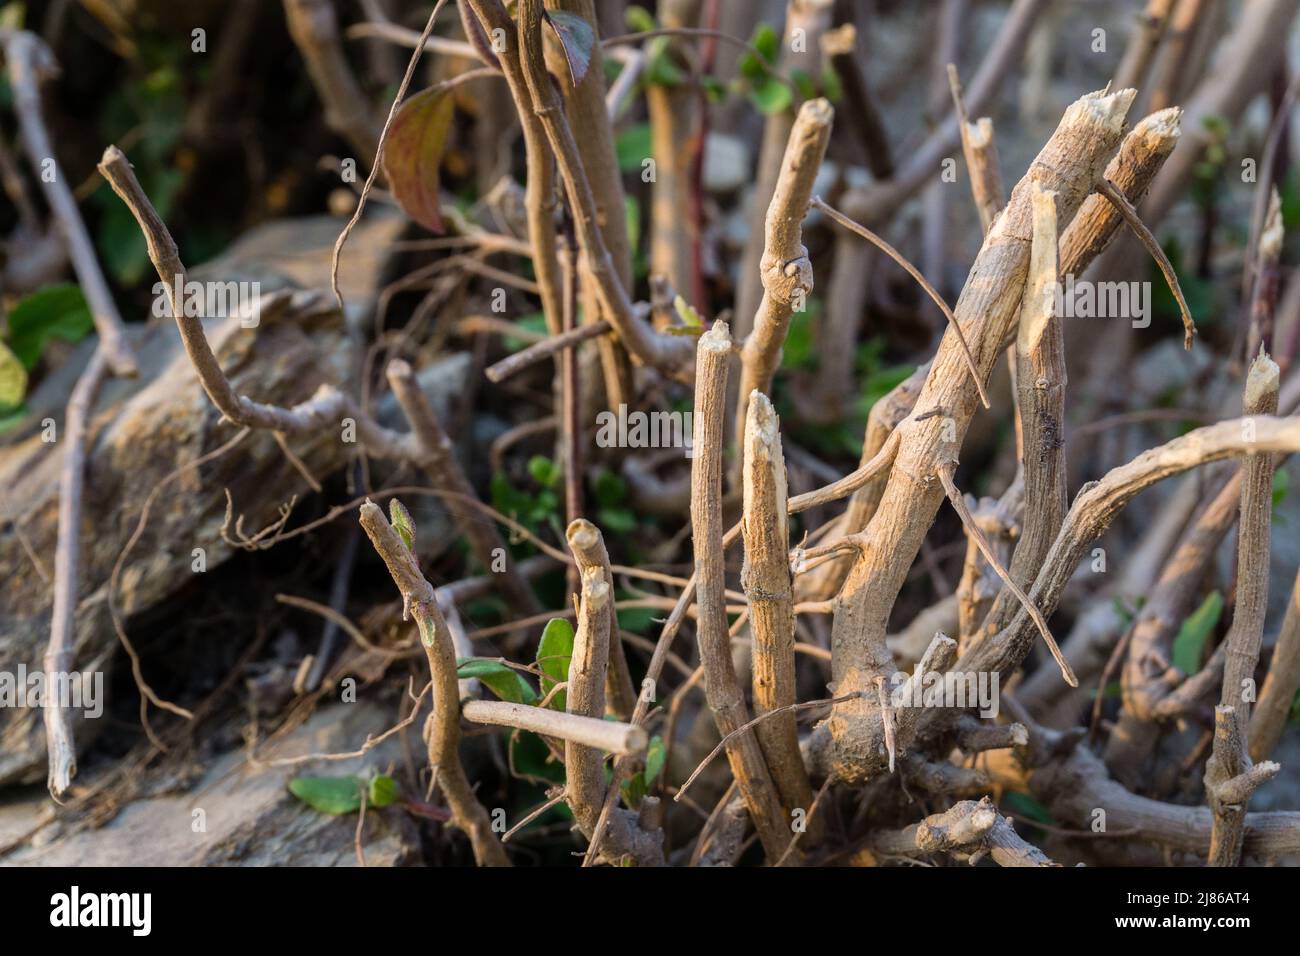 A close up shot of cut down hopbush stems leaving roots and stem only. India Stock Photo